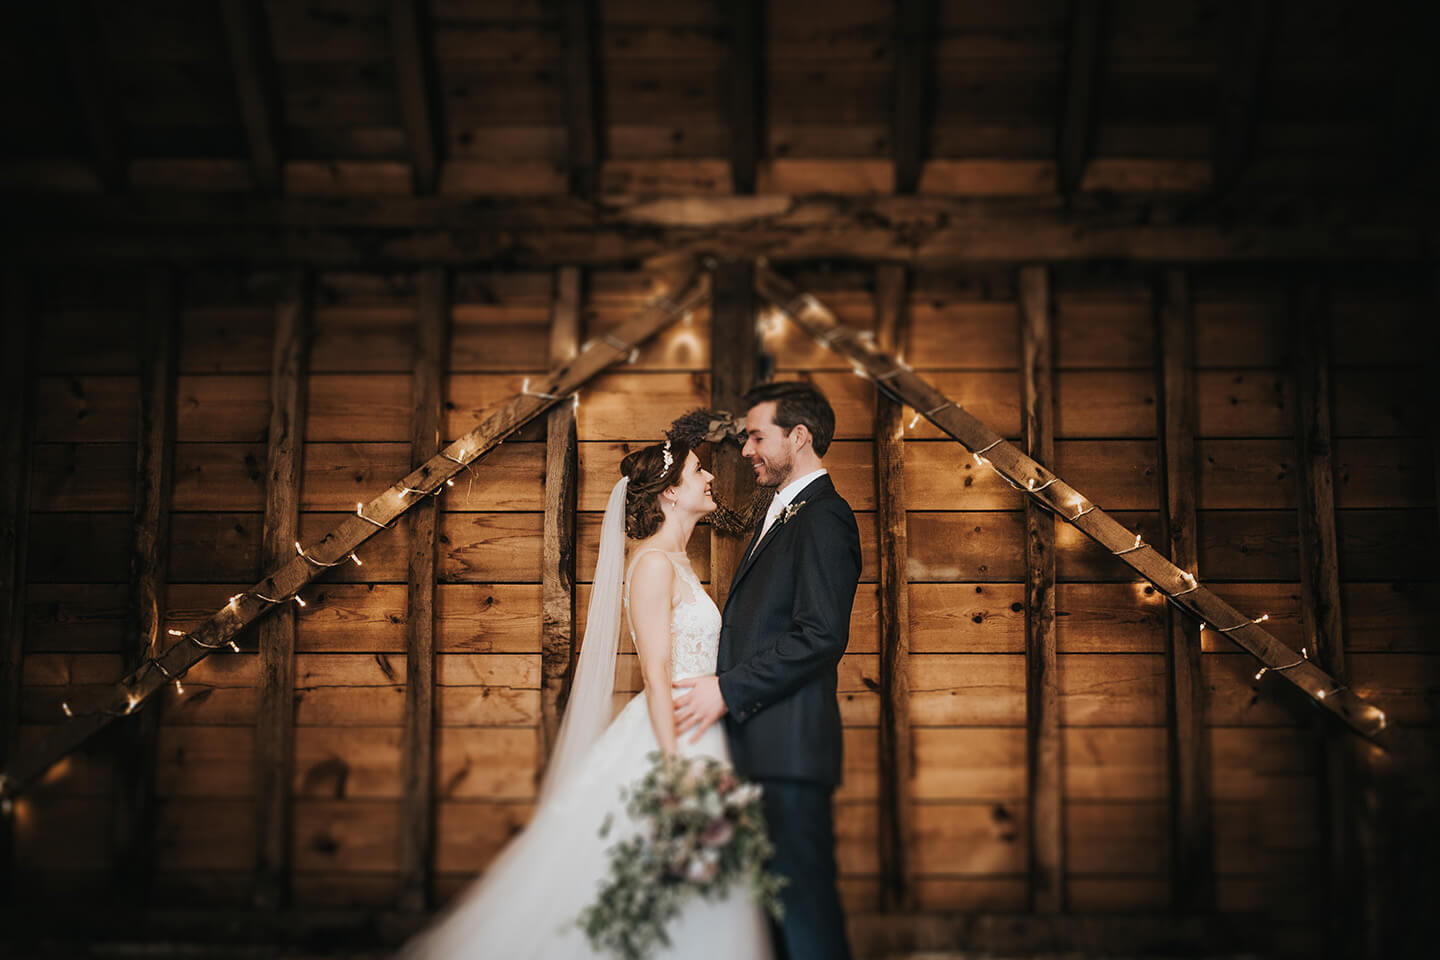 Your Wedding Day at Bassmead Manor Barns